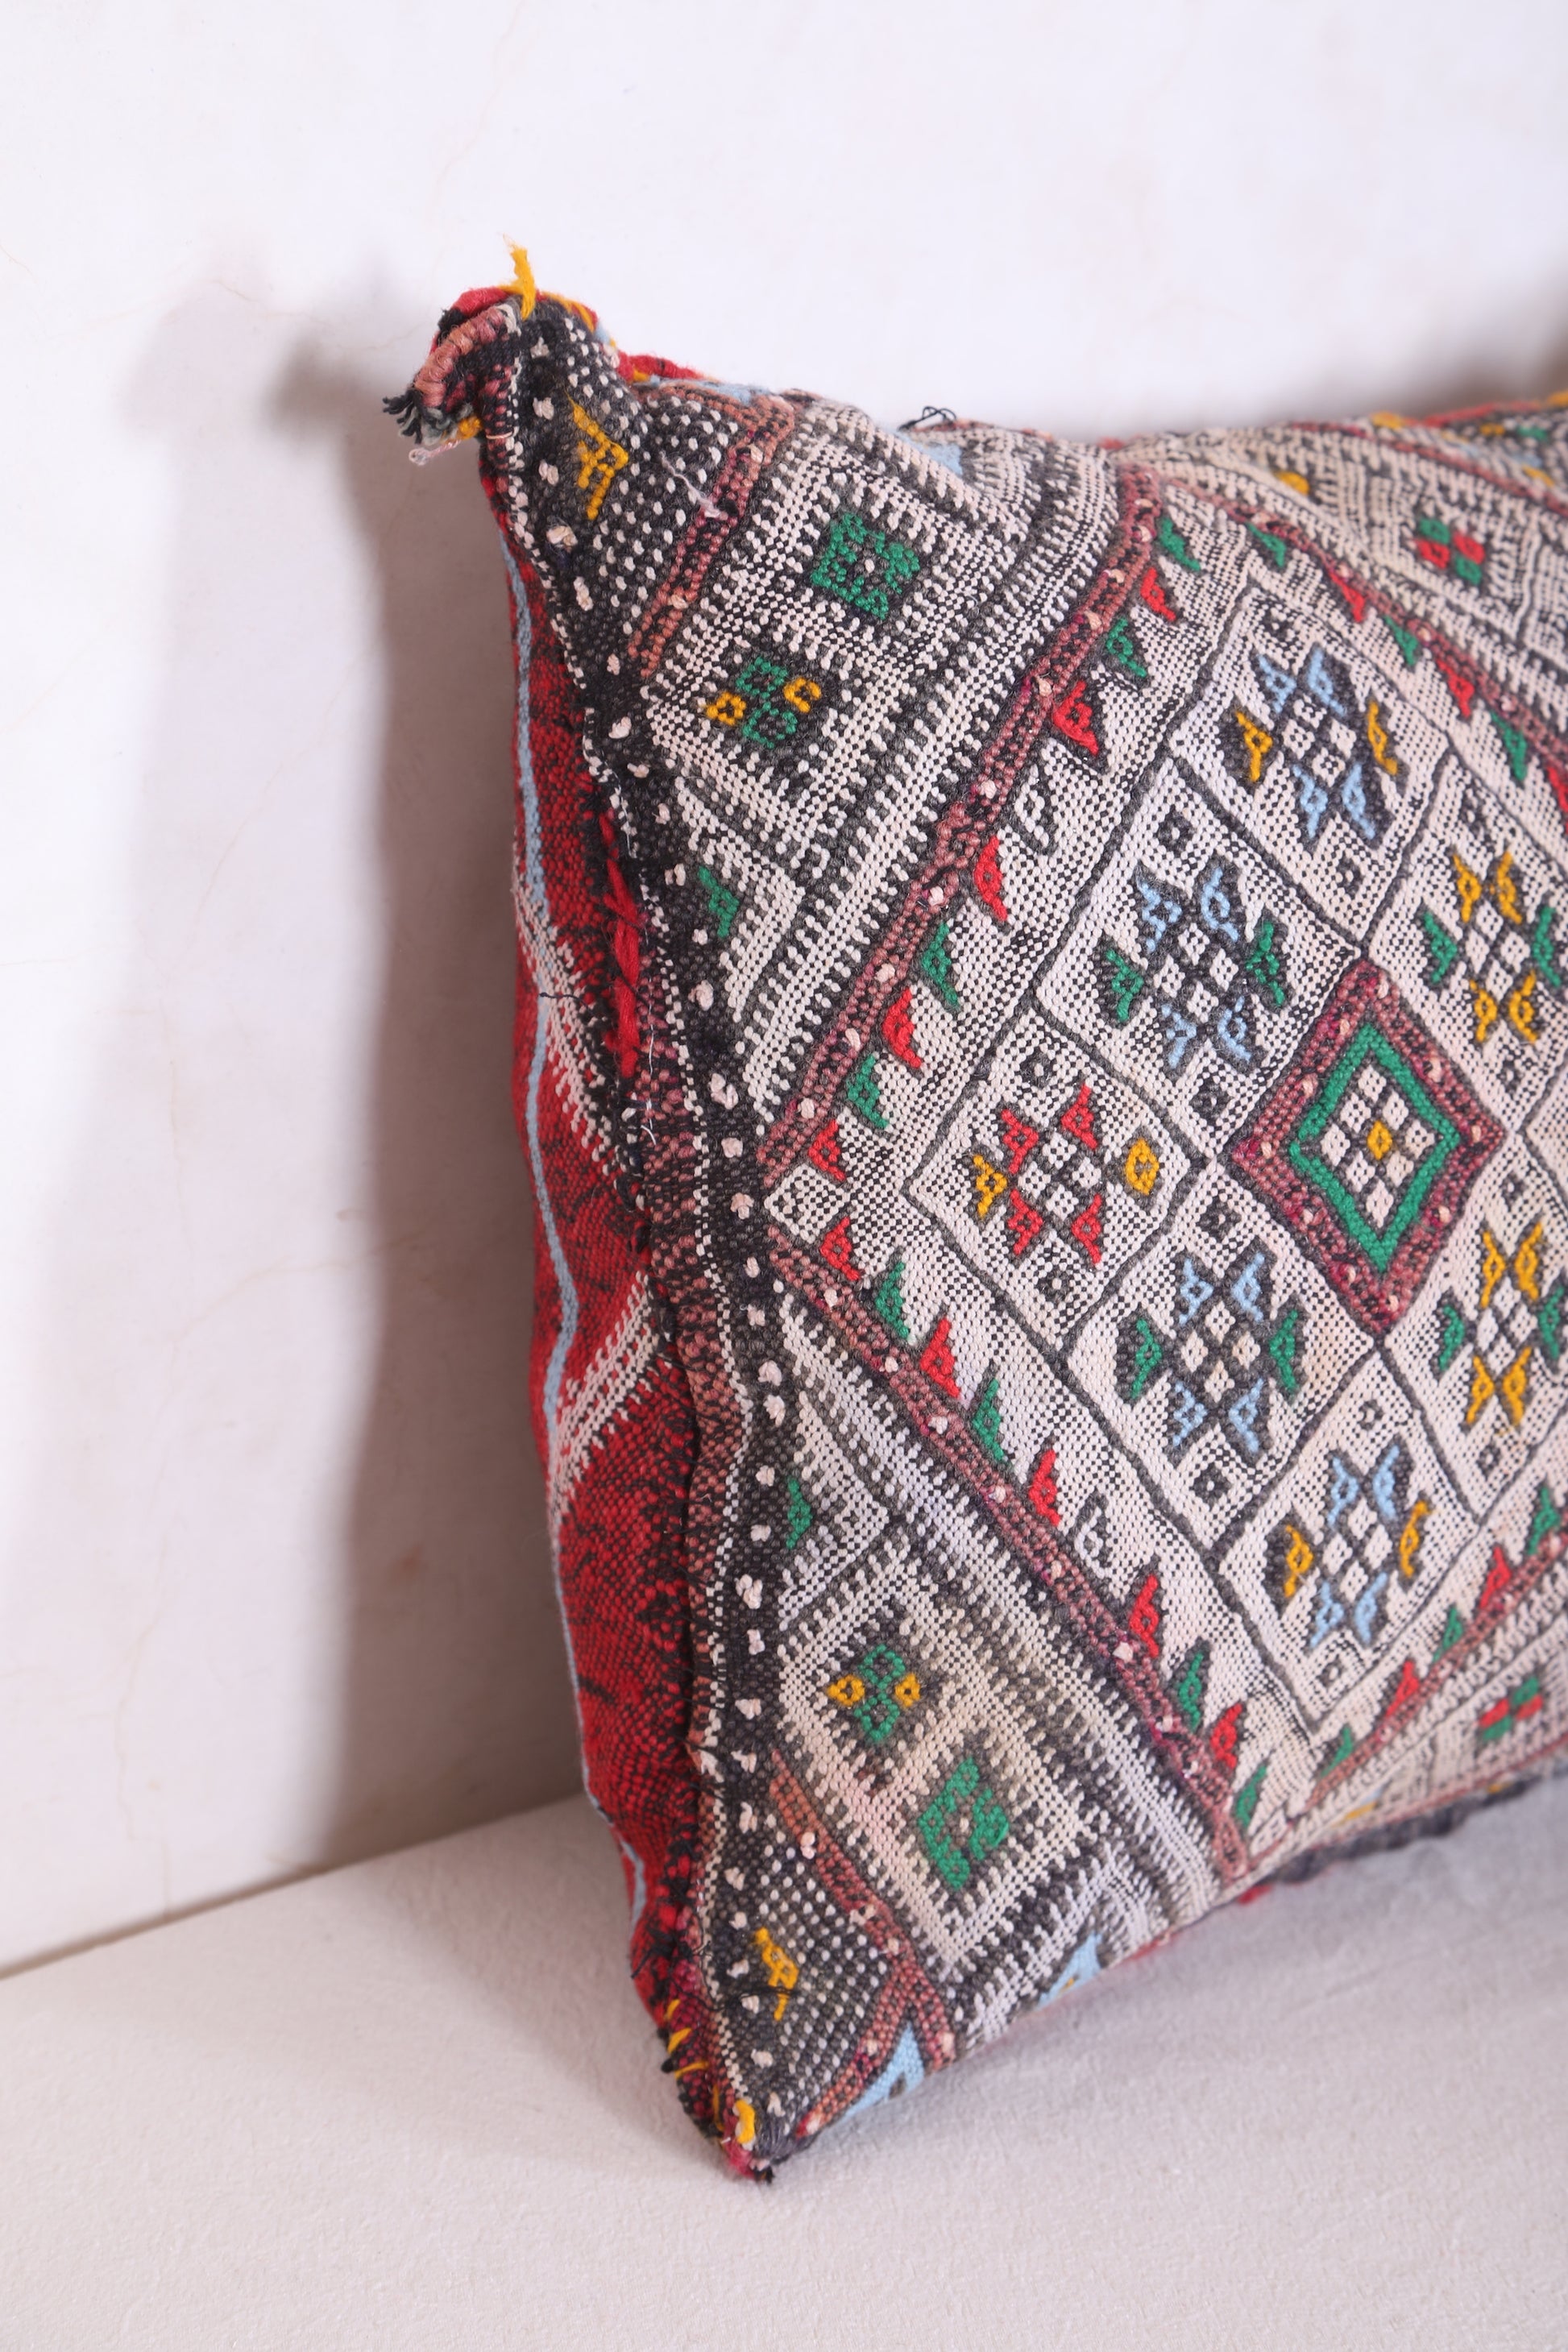 Vintage Moroccan pillow 17.3 INCHES X 22 INCHES